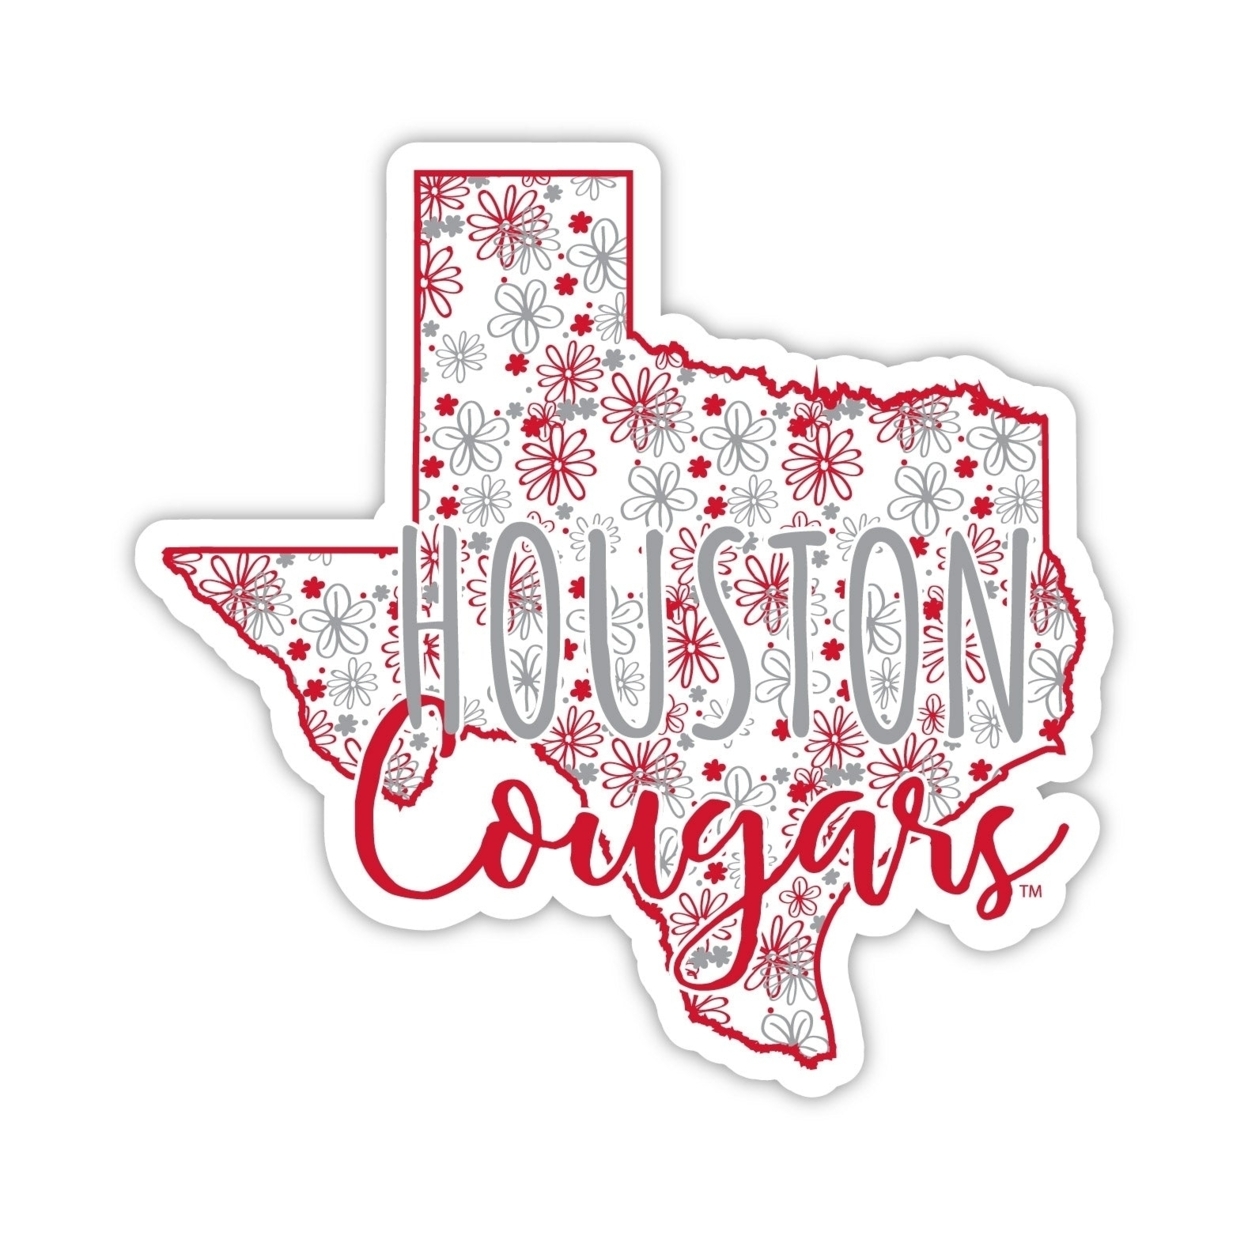 University Of Houston Floral State Die Cut Decal 2-Inch